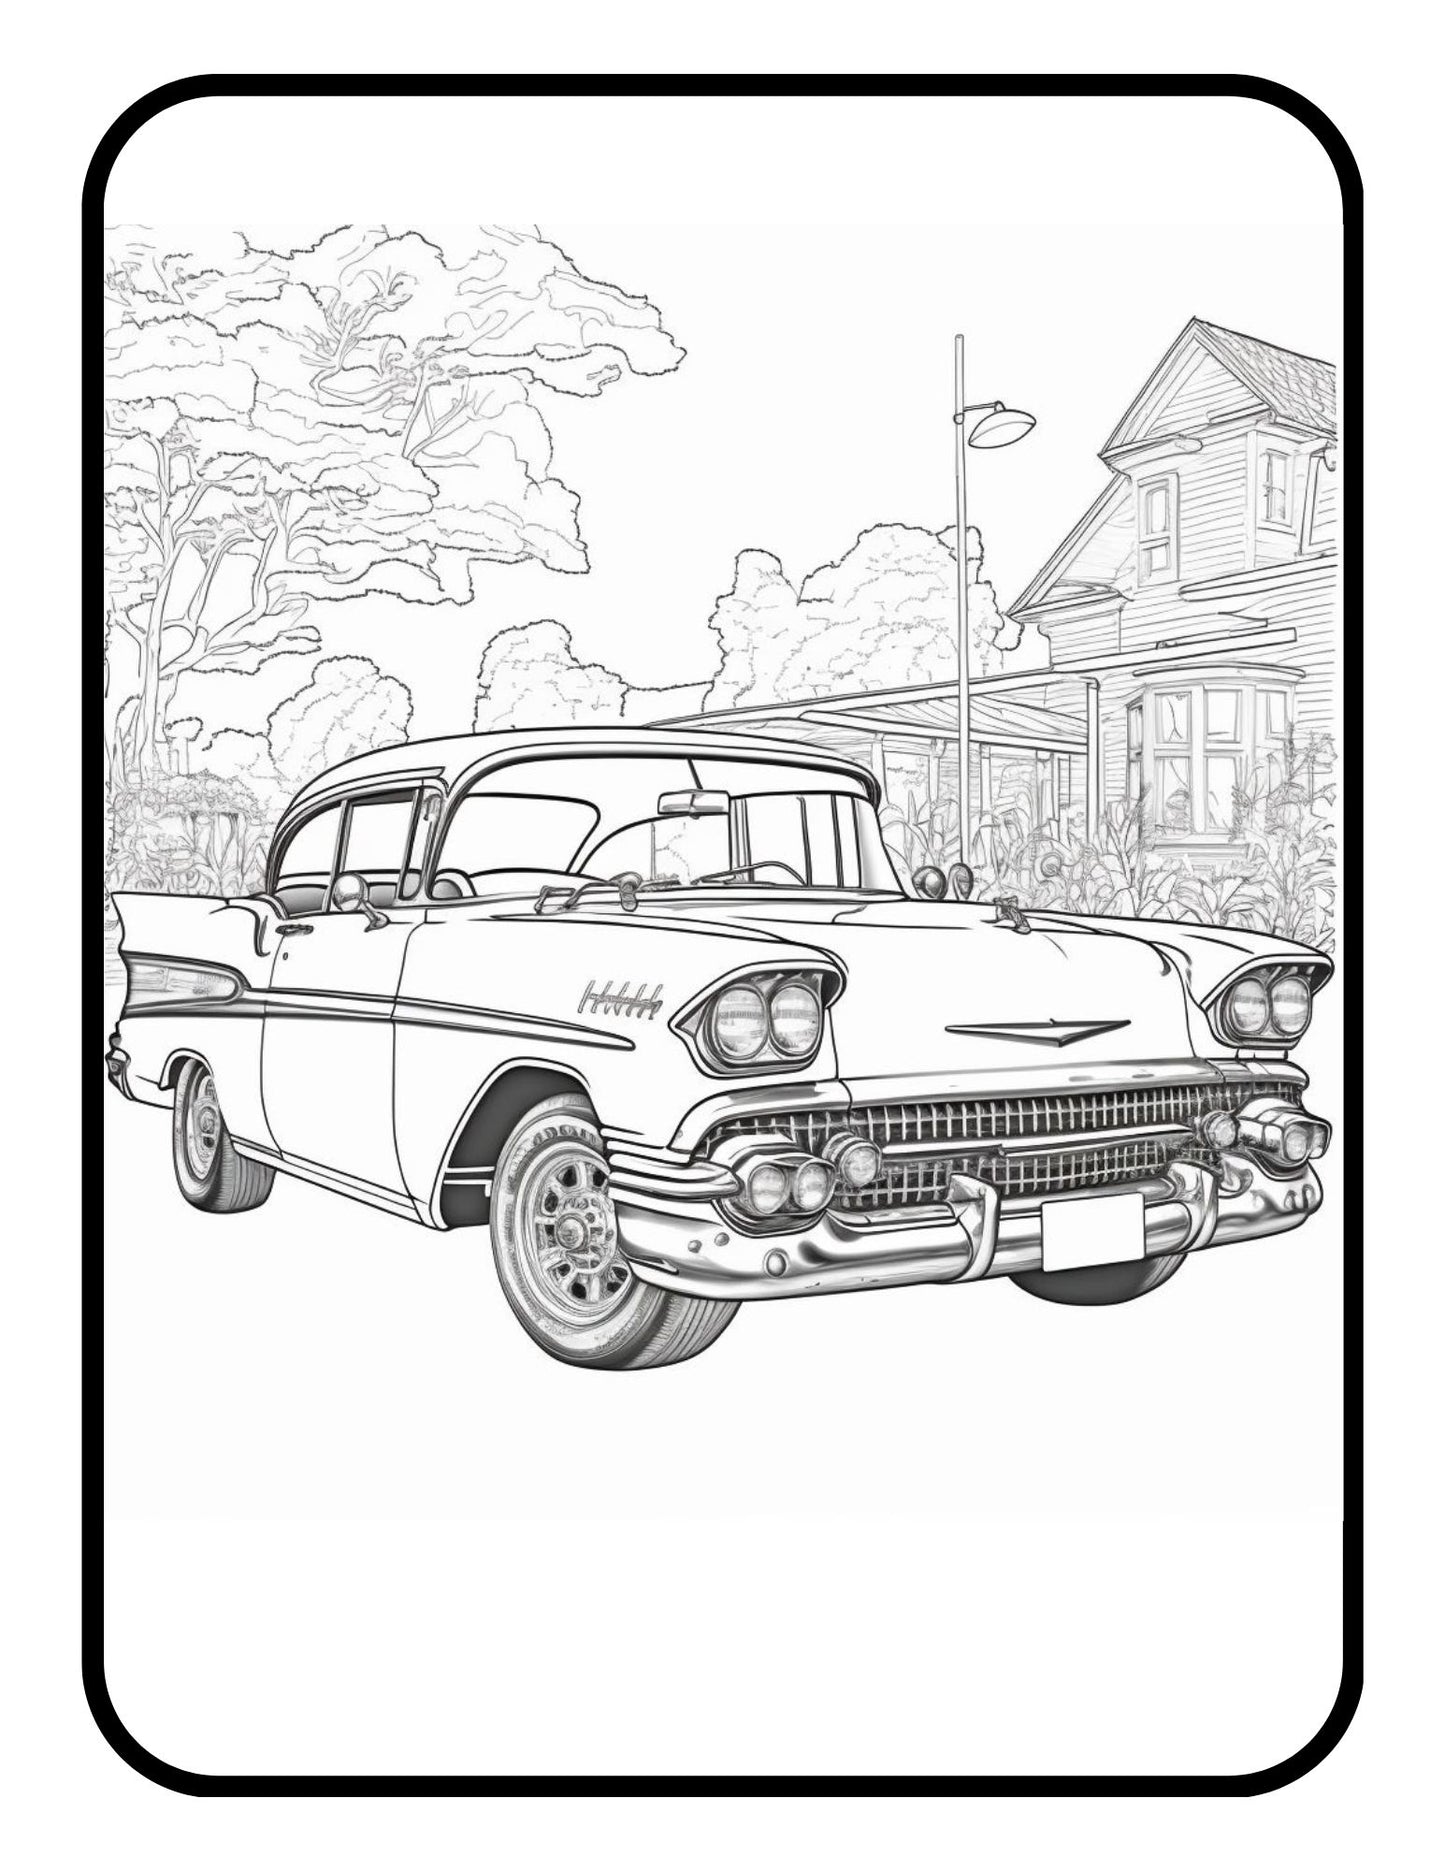 Vintage Classic Old Enthusiast Car Coloring Book Exotic Race Car For Men Classic Car Coloring Book For Adults Dream Vintage Coloring Book